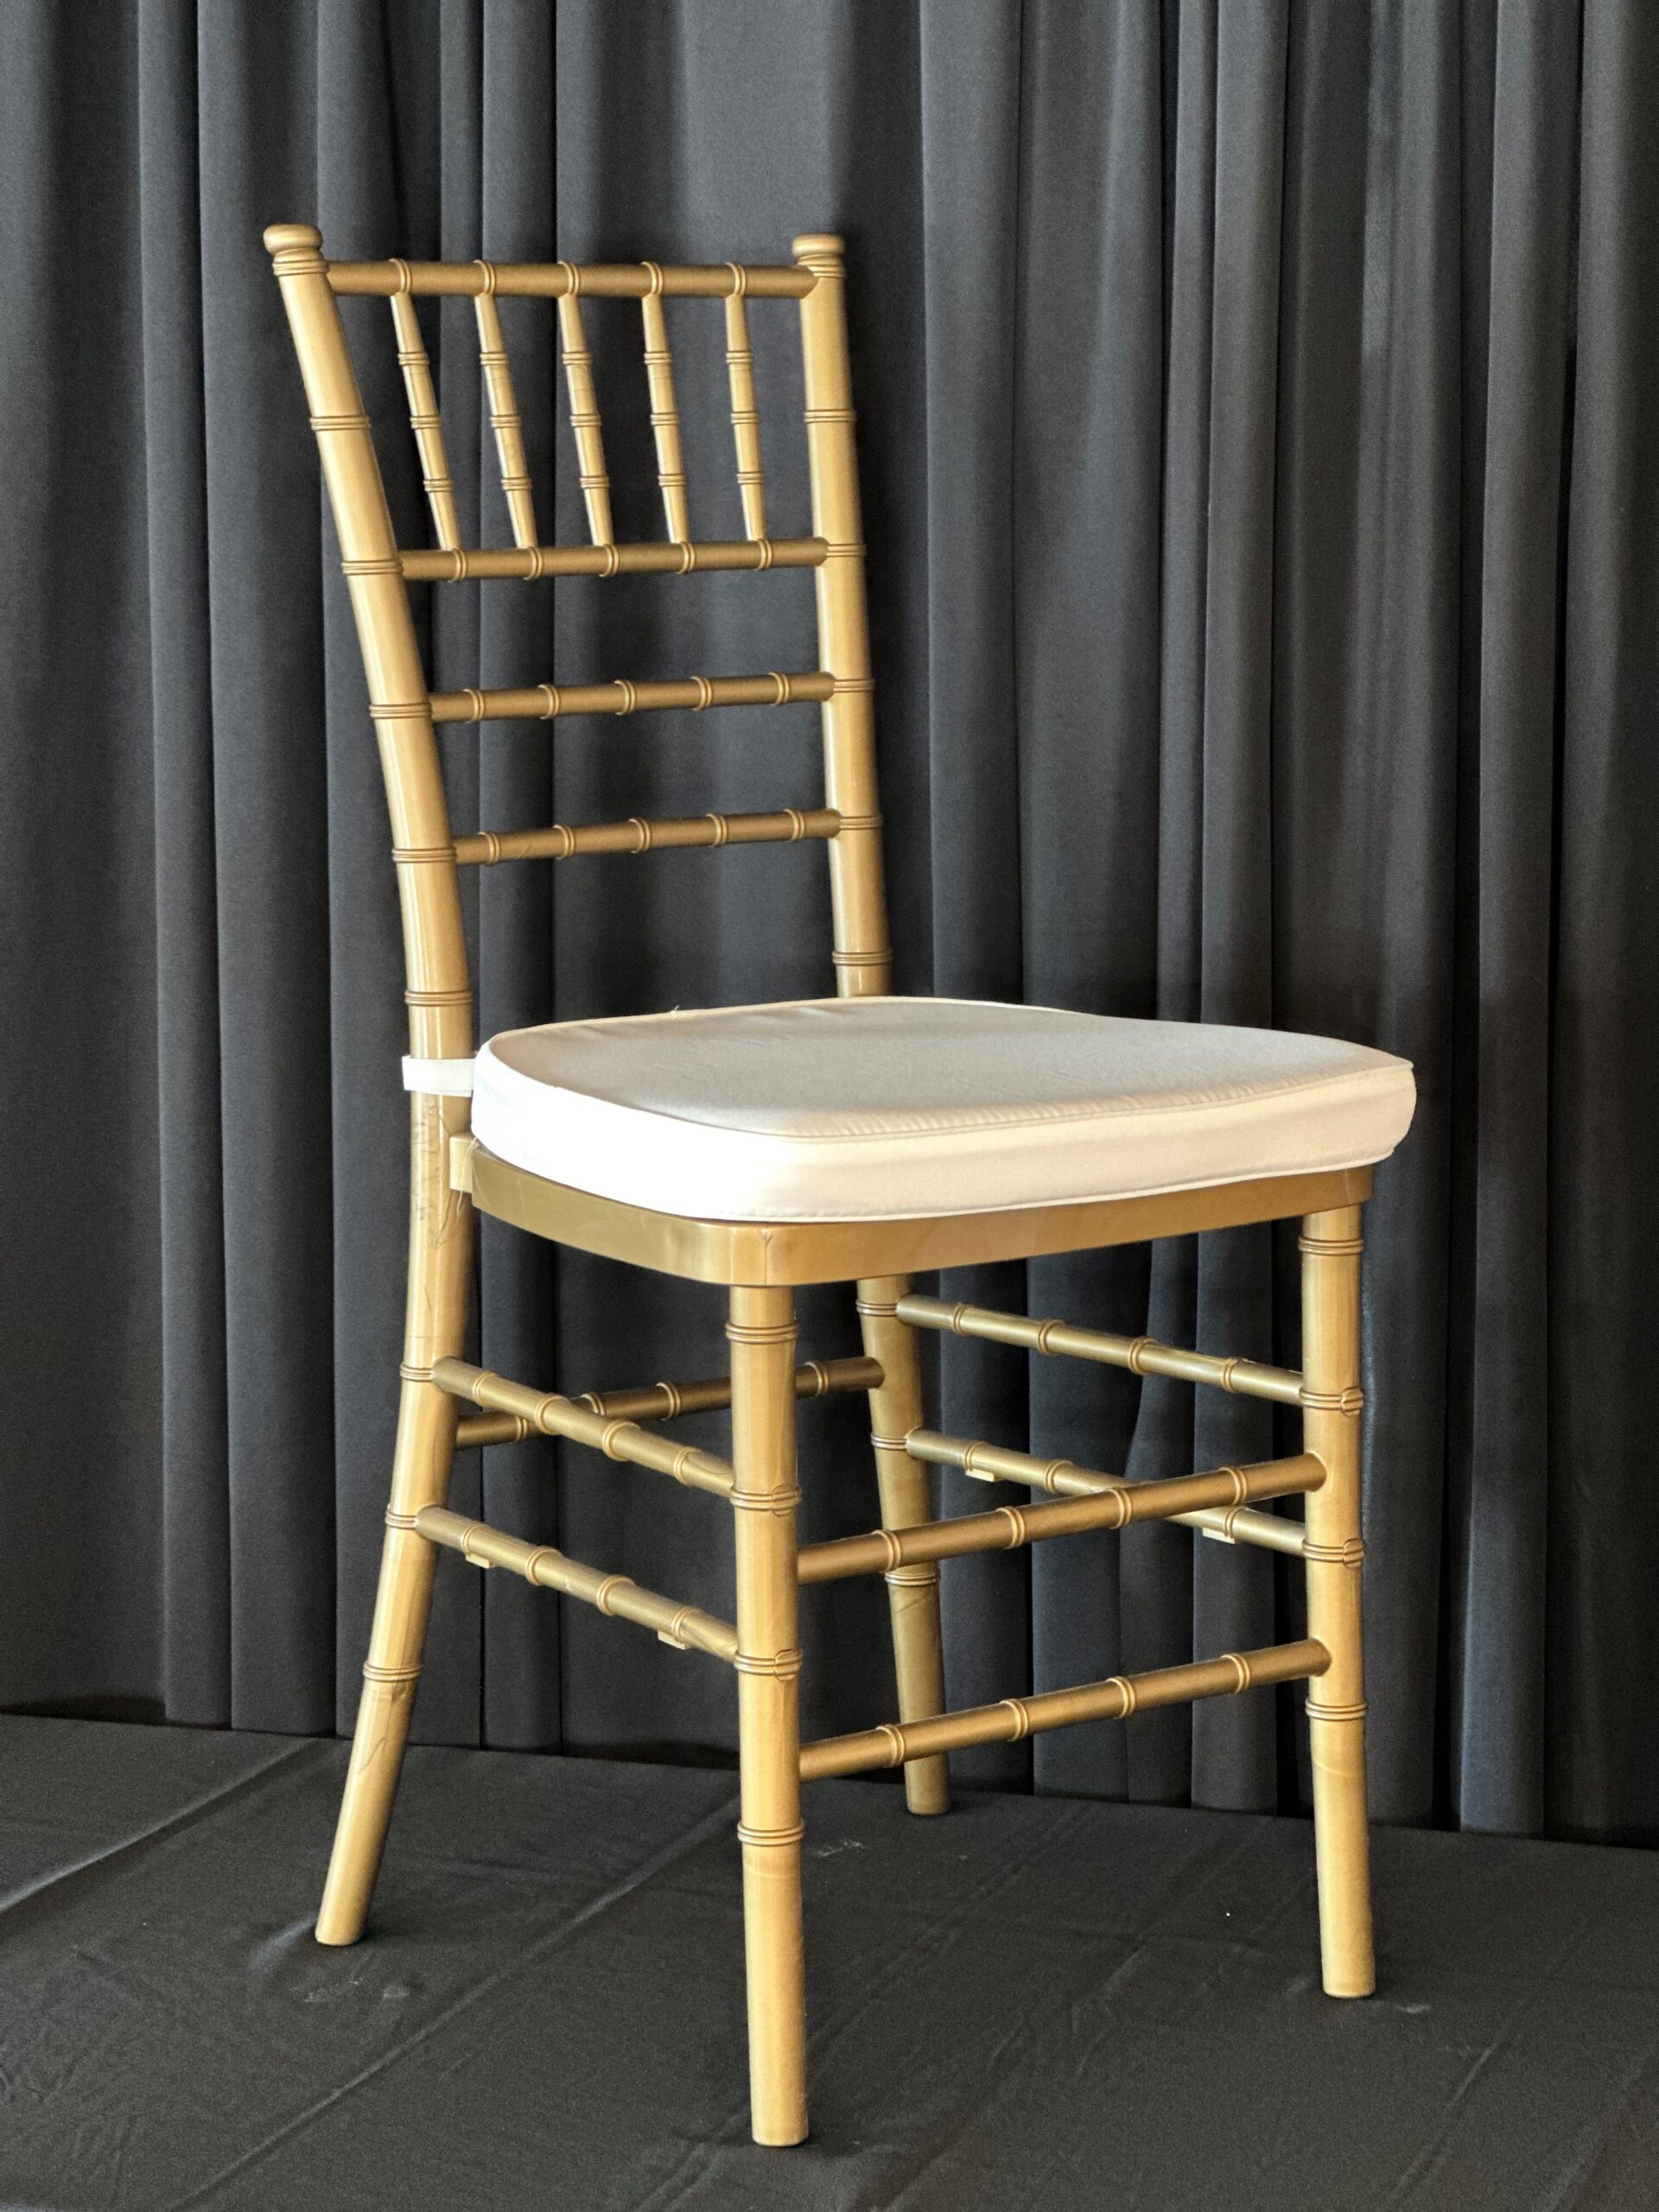 Gold Chiavari chair available for rent